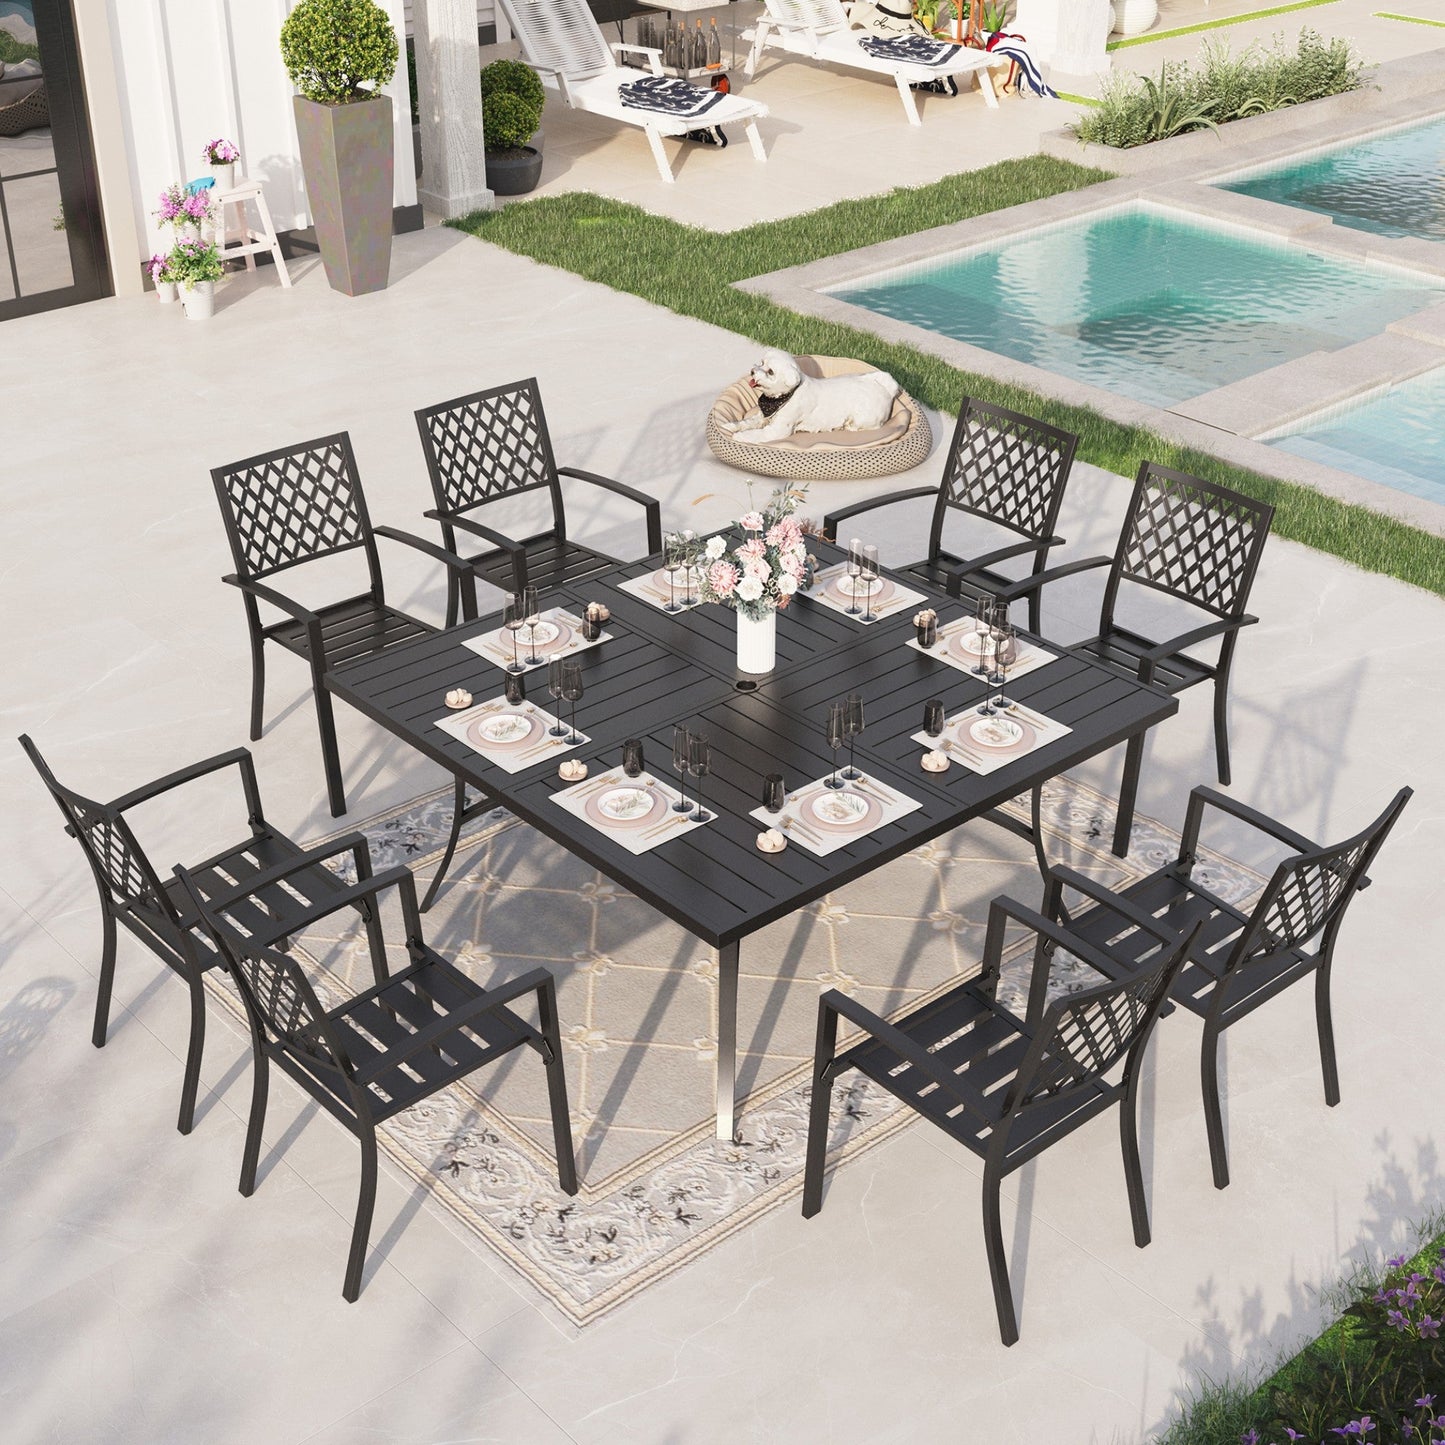 Sophia & William 9 Piece Outdoor Metal Patio Dining Set 60 Square Table and Chairs Furniture Set for 8, Black